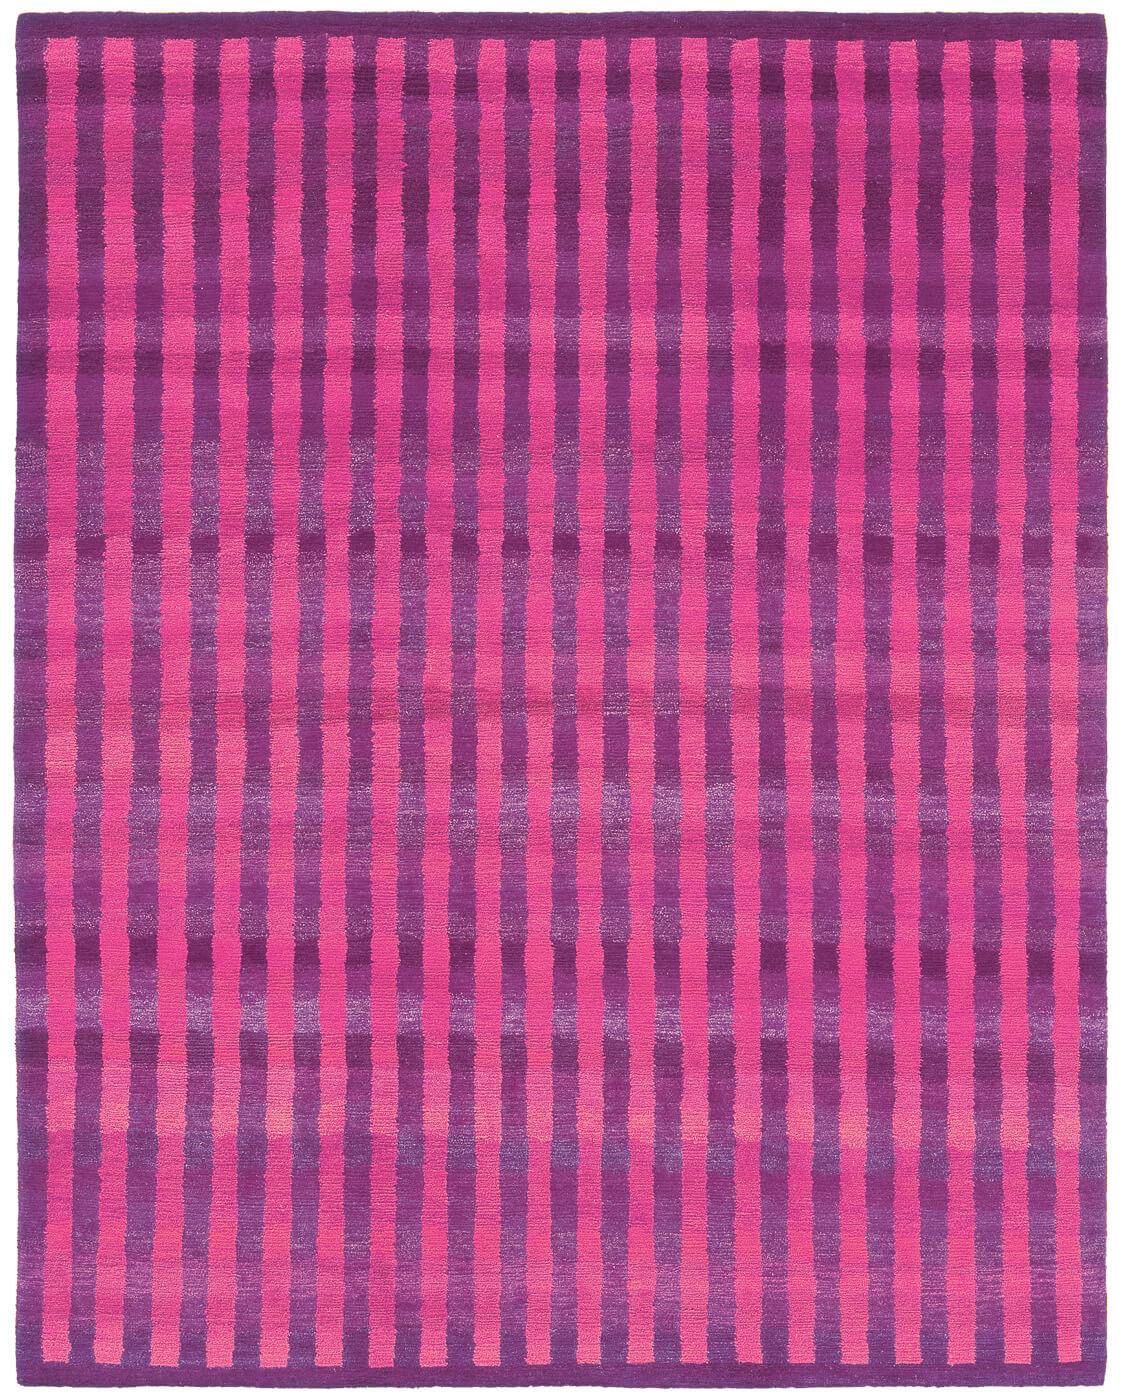 Hand-woven Pink Stripes Luxury Rug ☞ Size: 300 x 400 cm